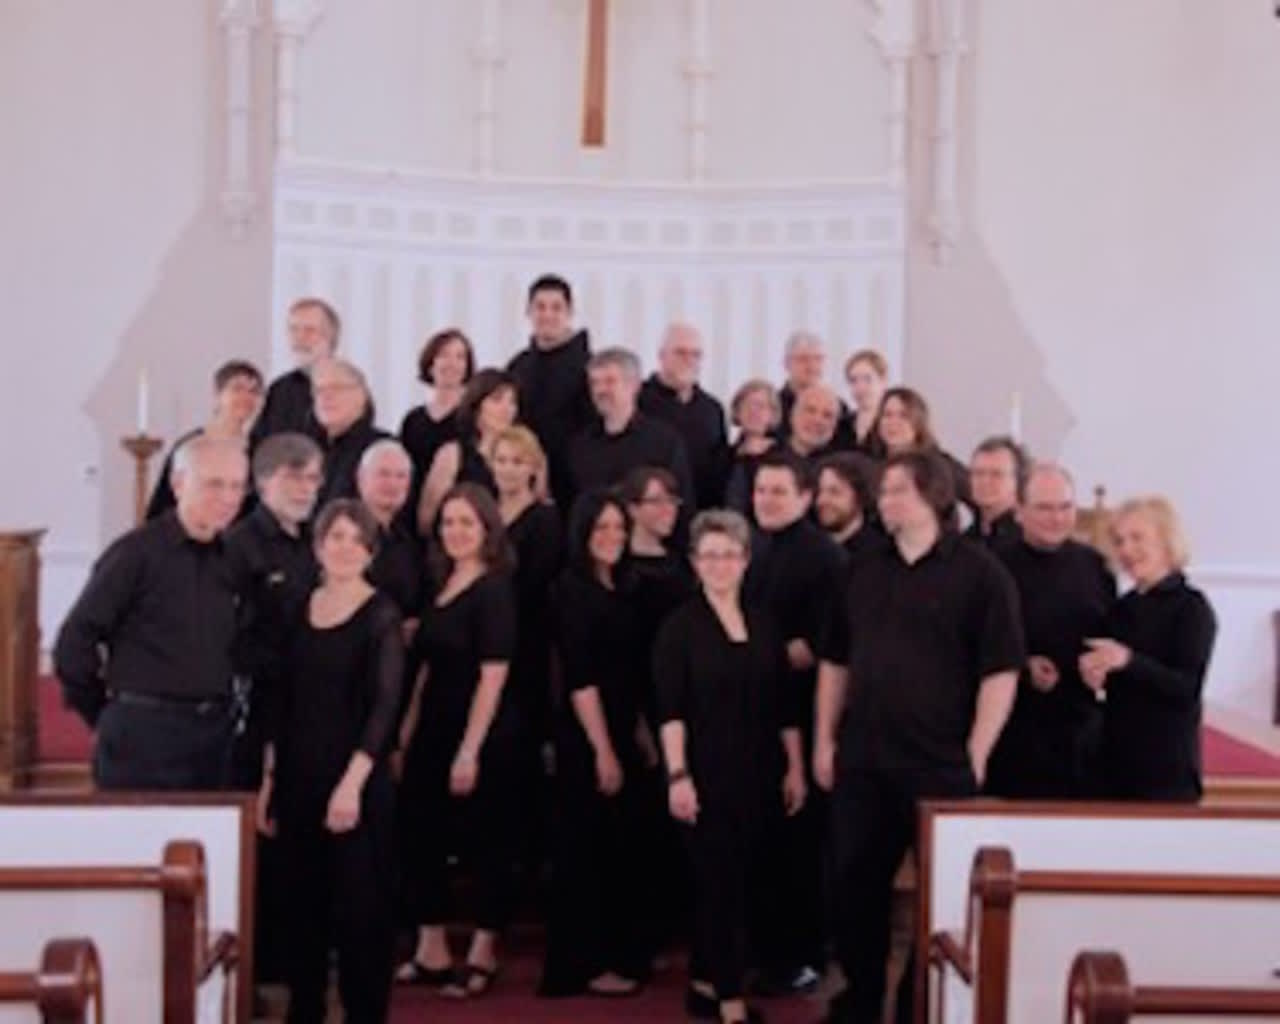 Charis Chamber Voices, pictured, will perform with Camerata Vocale Hannover on Sunday at the First Presbyterian Church of New Canaan.